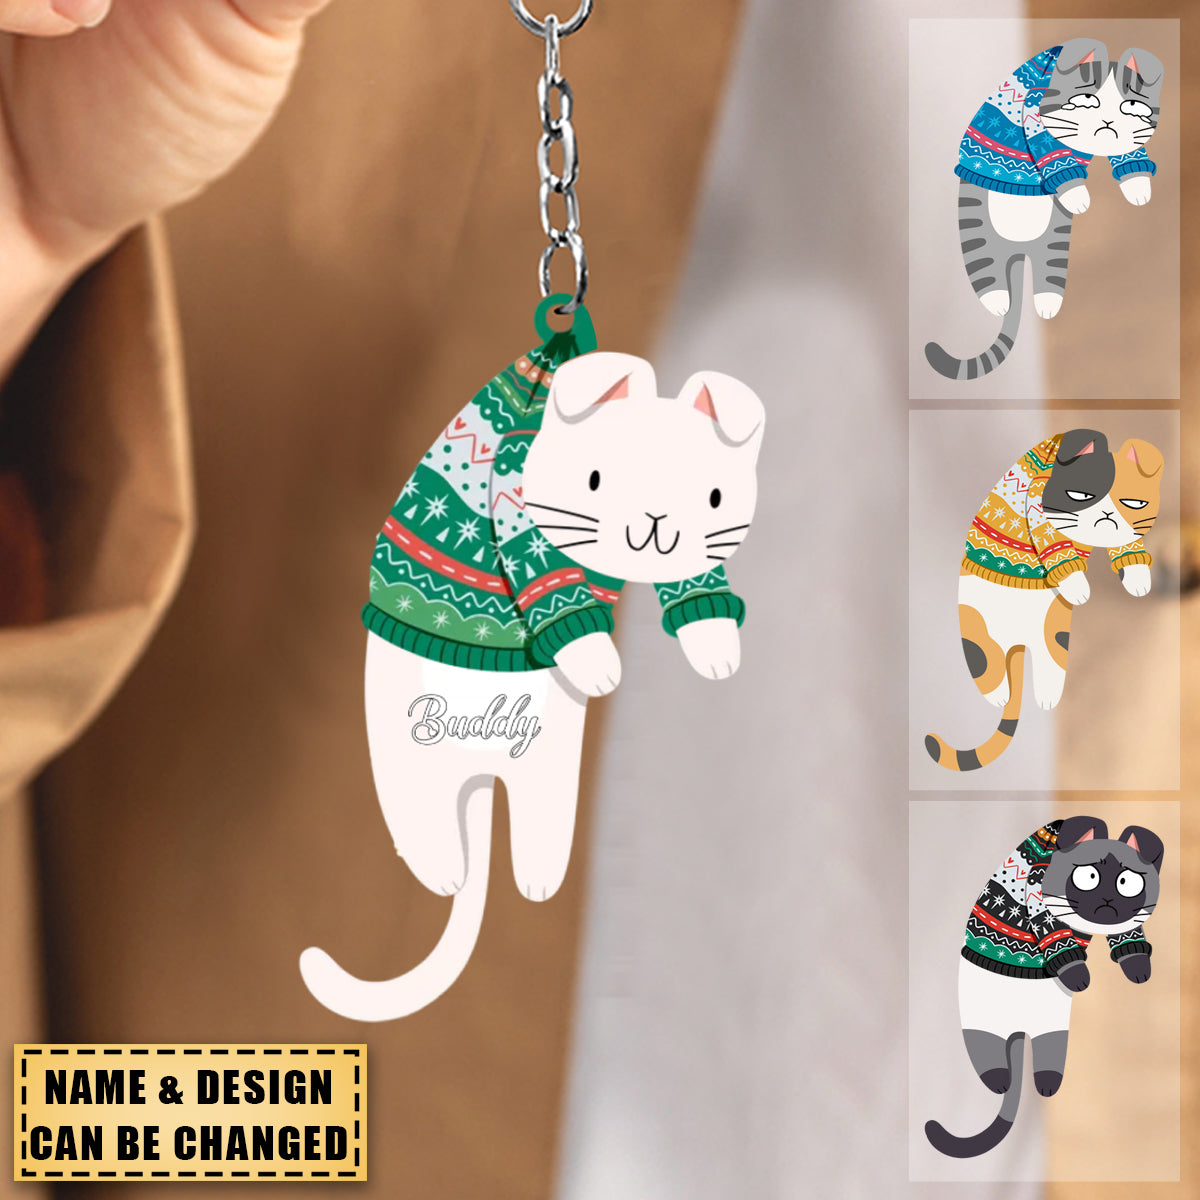 Hanging Cats - Personalized Acrylic Keychain